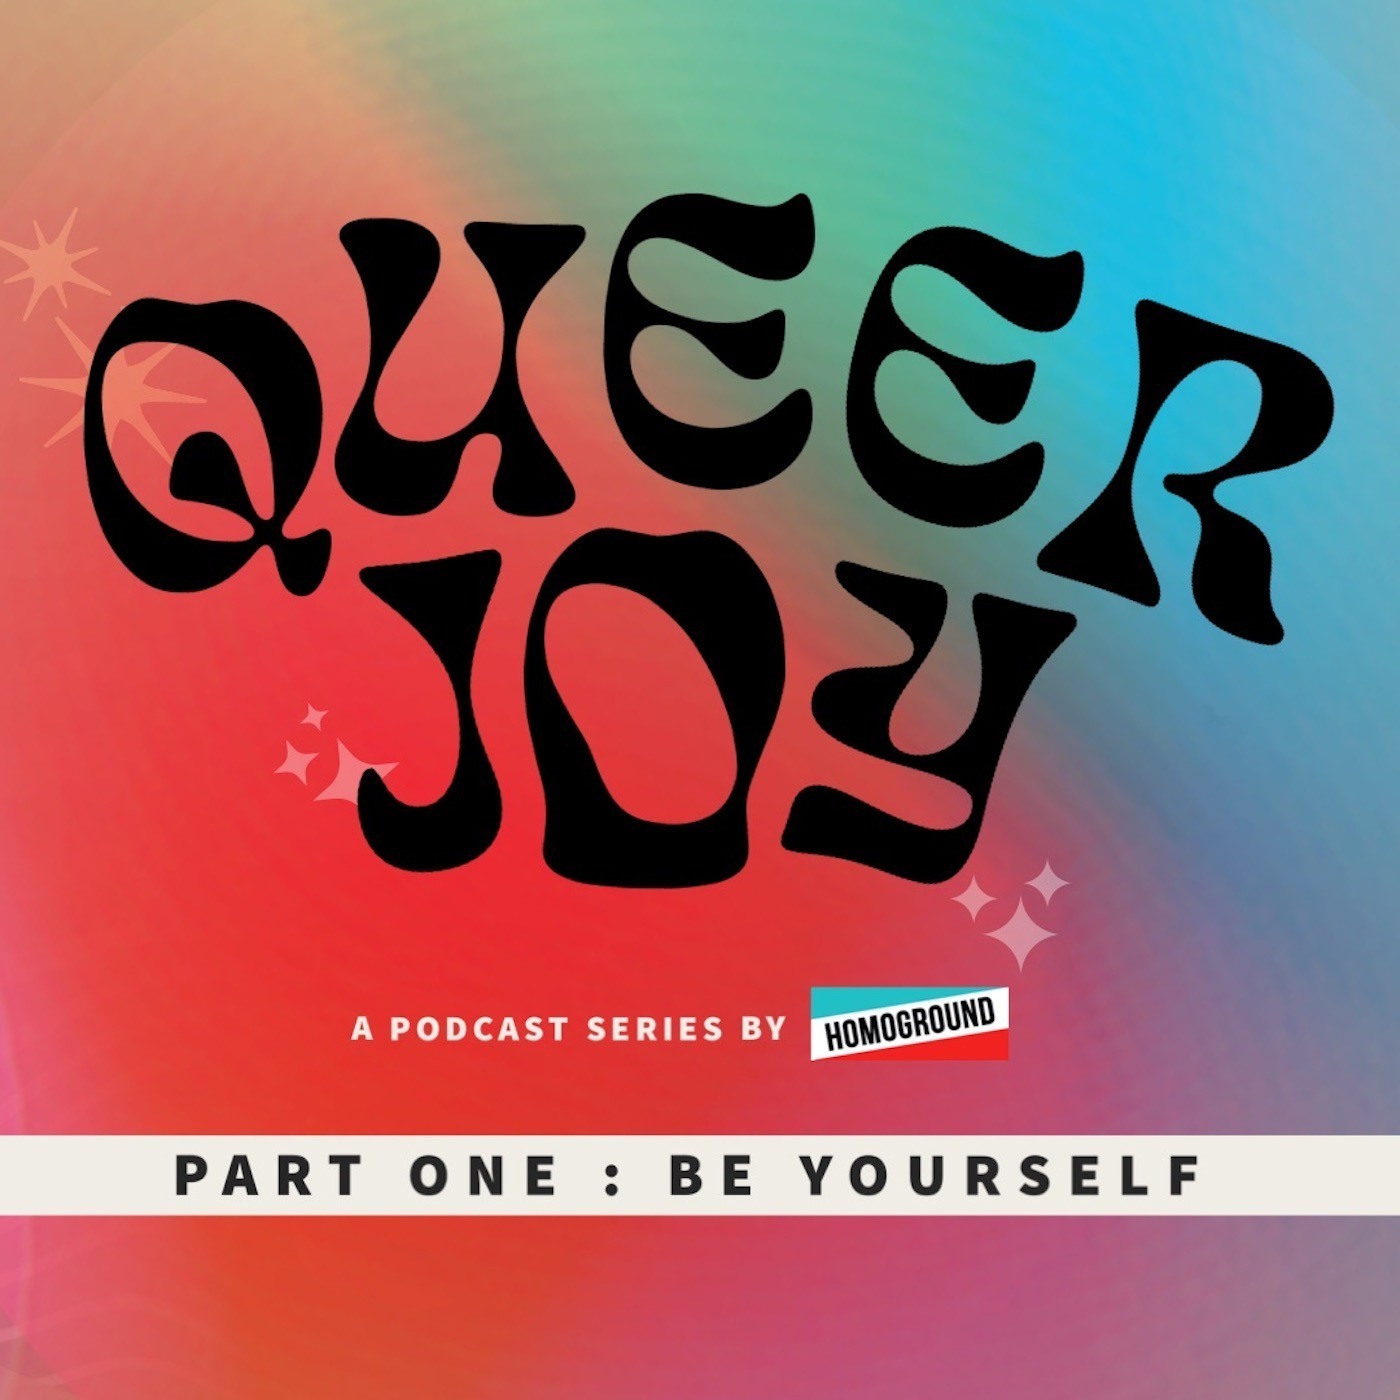 Queer Joy Part 1: "Be Yourself" Featuring Papa Molly, JayceJanae, Boy Bowser, Kamerin [#273]